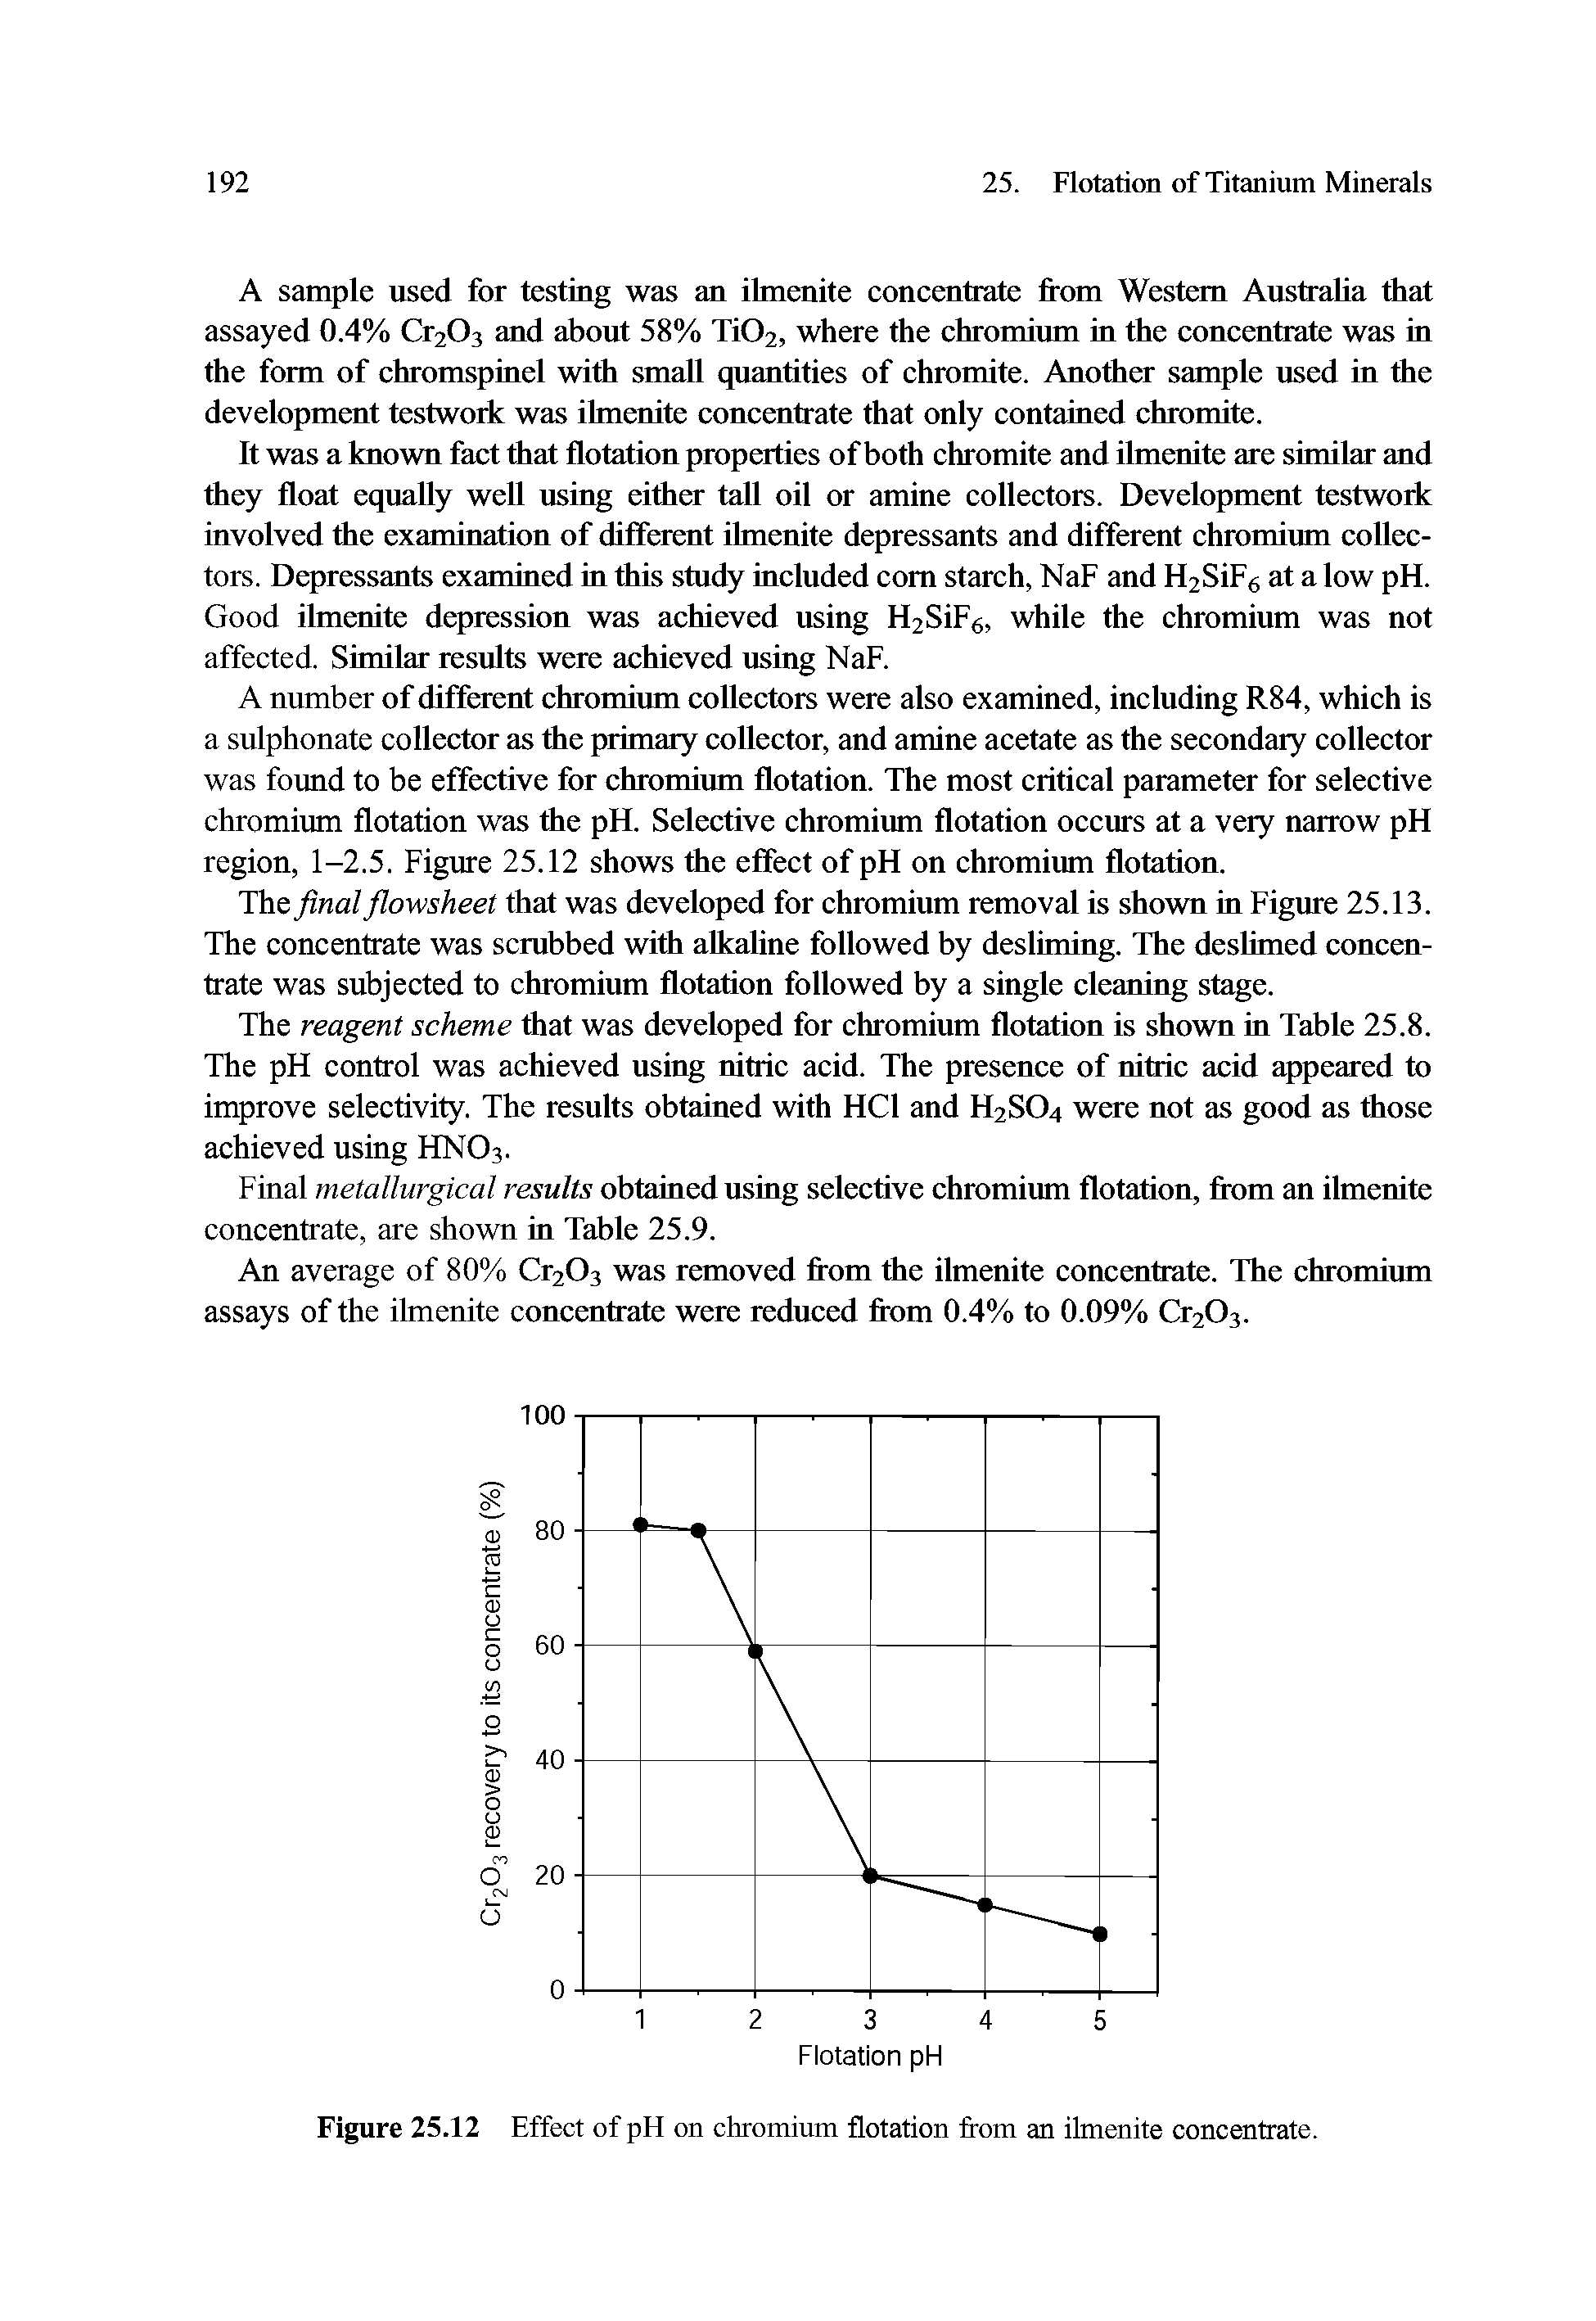 Figure 25.12 Effect of pH on chromium flotation from an ilmenite concentrate.